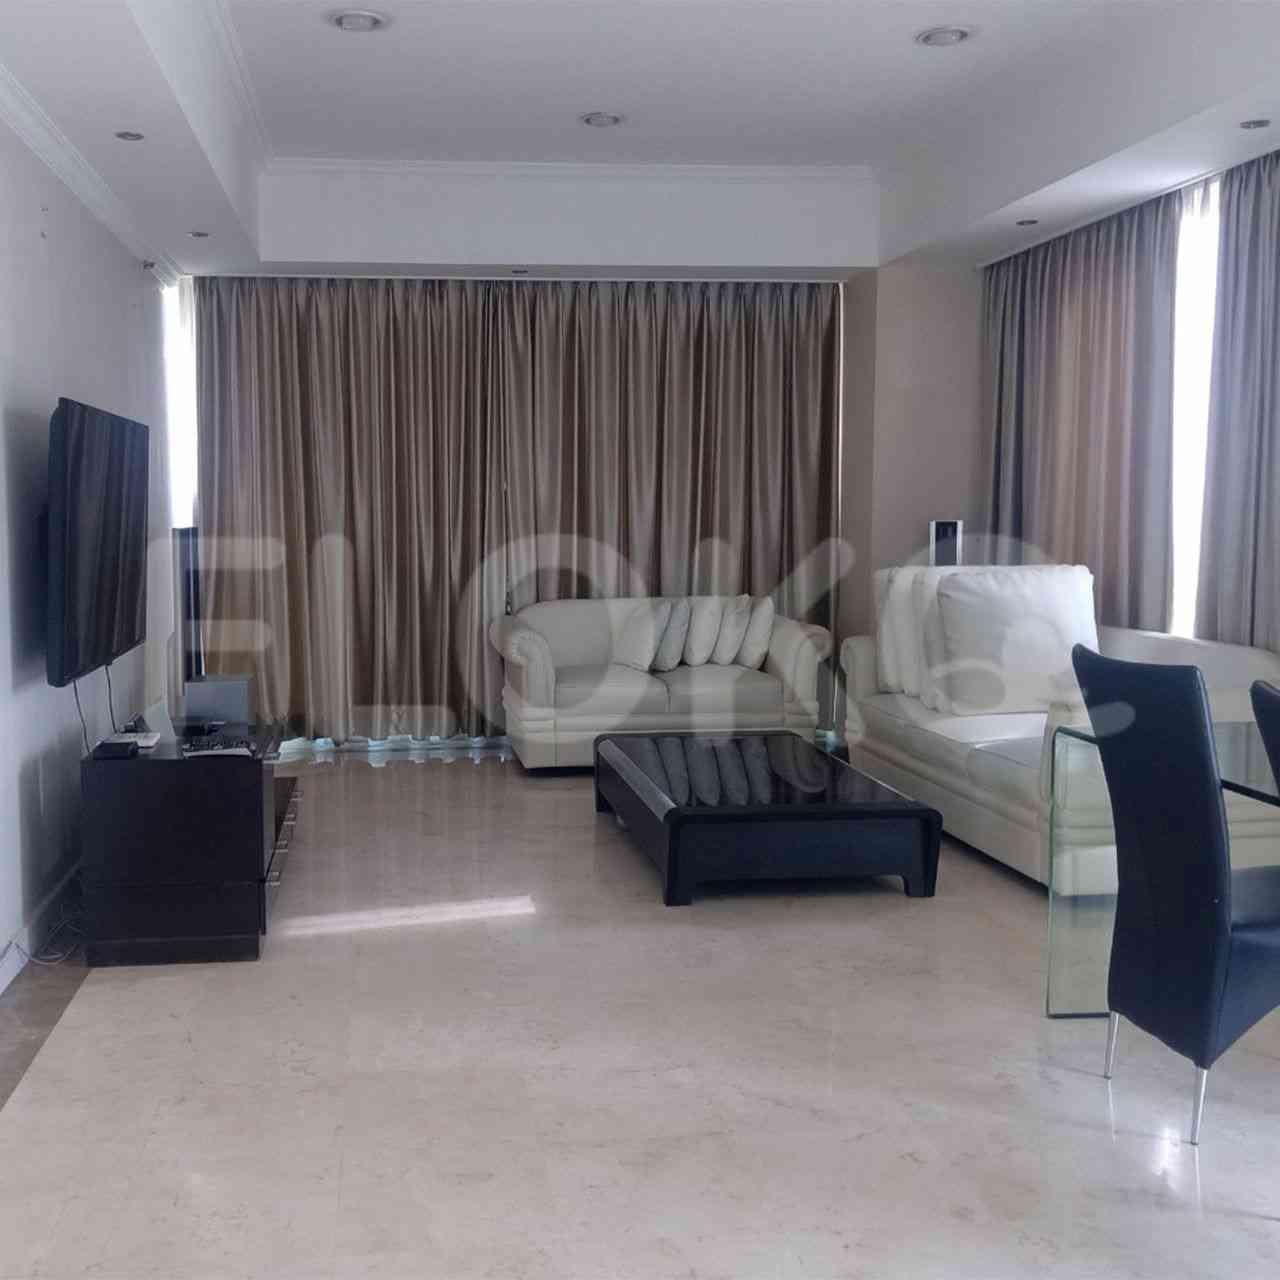 3 Bedroom on 15th Floor for Rent in Casablanca Apartment - ftebd9 7